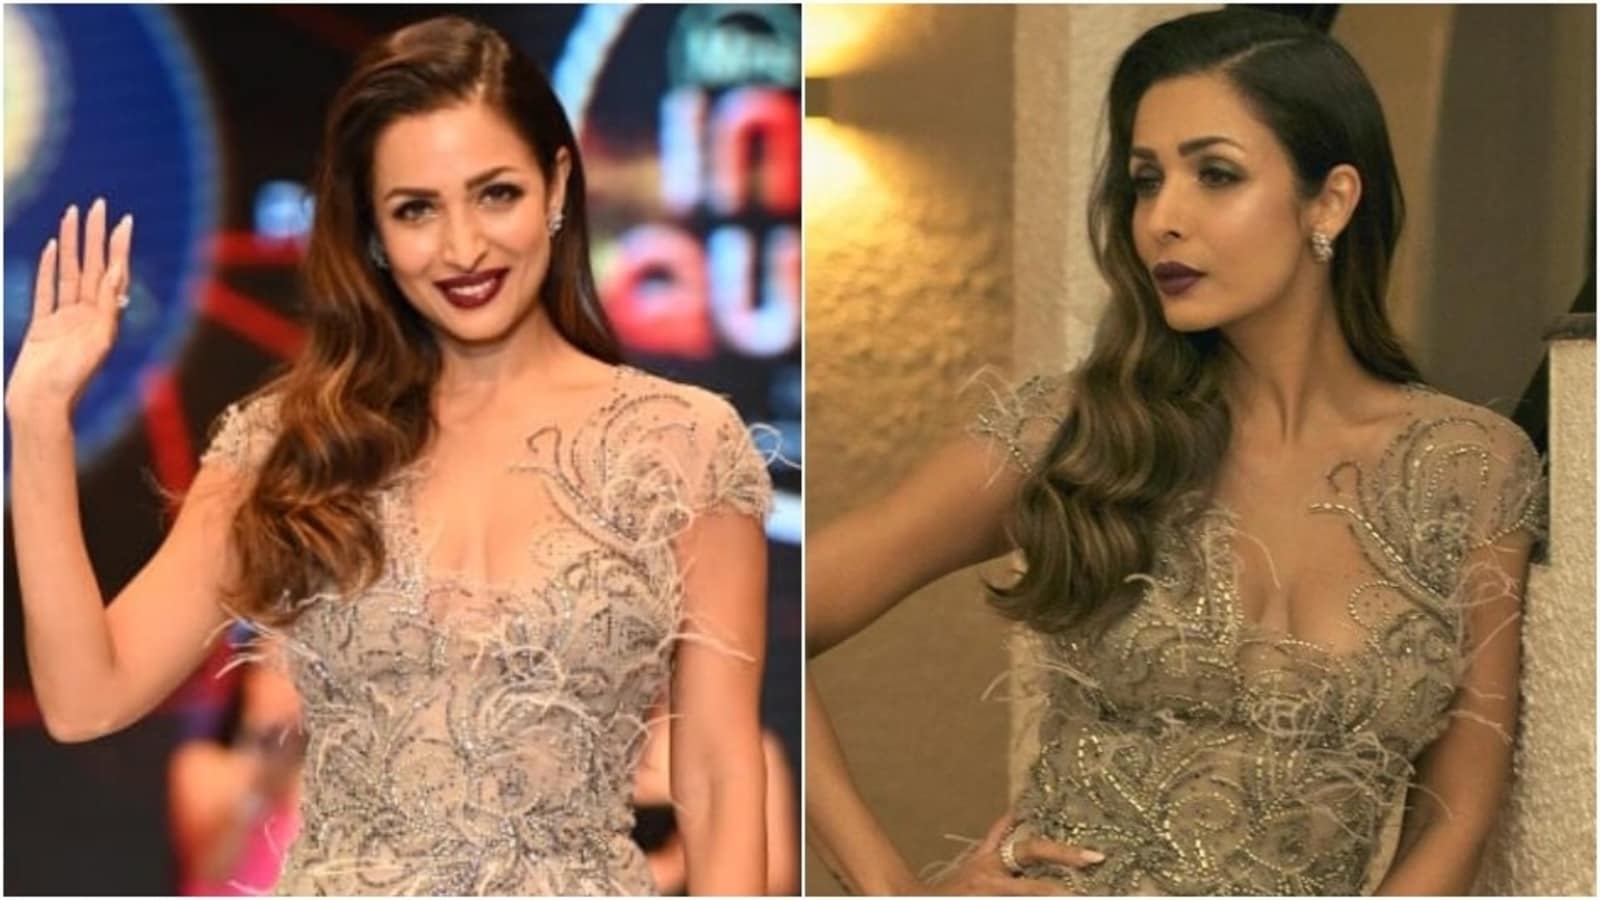 Malaika Arora serves a sensuous look in figure-hugging silver dress with plunging neck